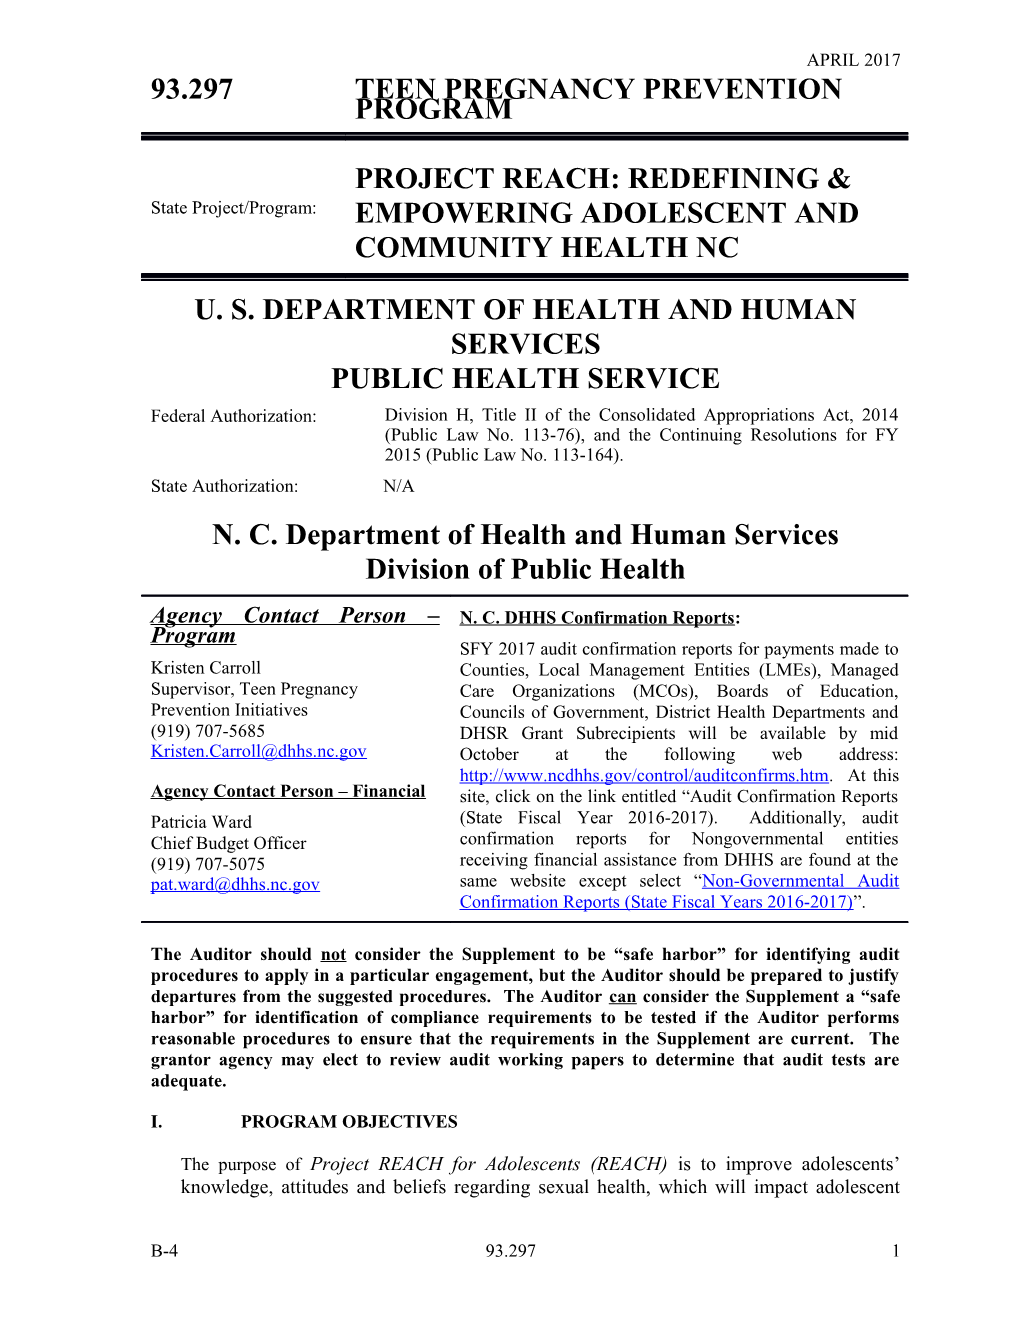 Project Reach: Redefining & Empowering Adolescent and Community Health Nc